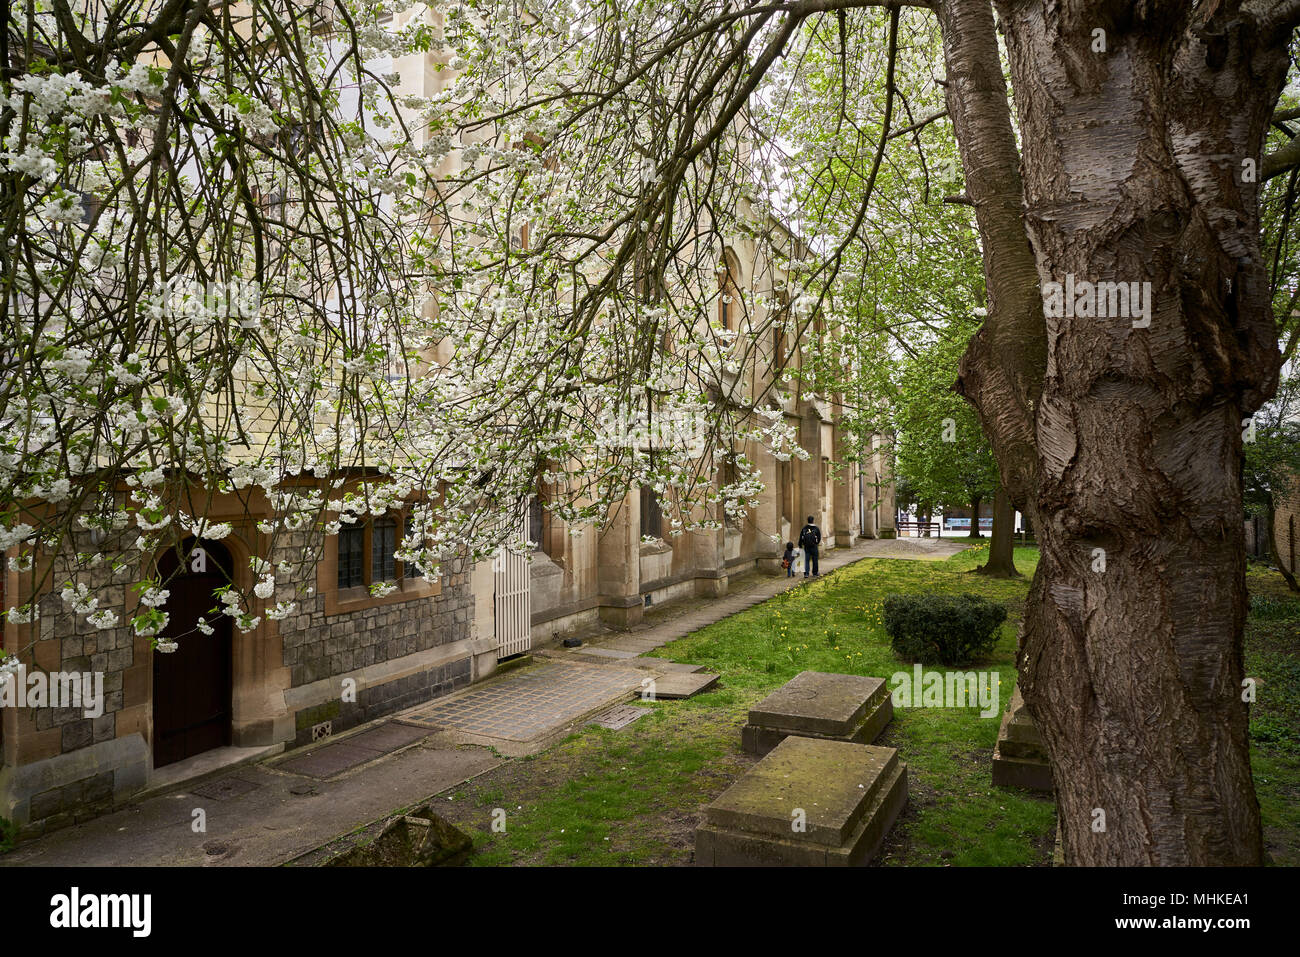 24 April 2018, Windsor, Great Britain: A man and his child walking through the church yard of the Windsor Palace. Prince Harry and American Actress Meghan Markle will be saying their Wedding Vows on May 19, 2018 at the Windsor Palace. Photo: David Azia/dpa Stock Photo